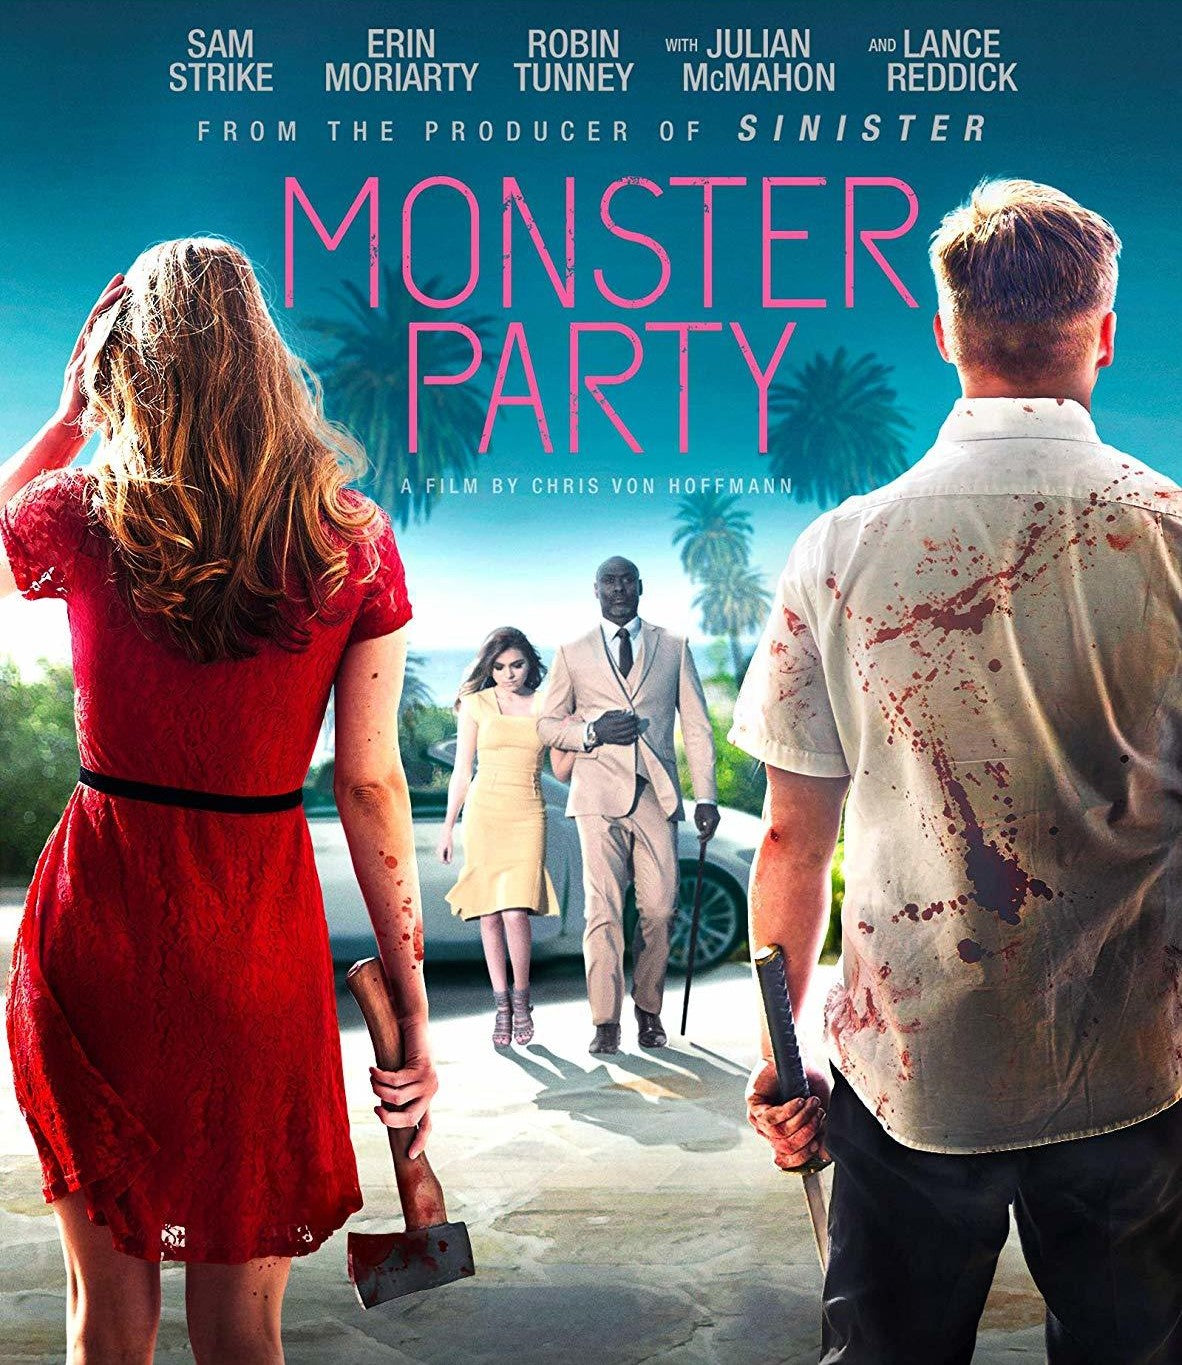 MONSTER PARTY BLU-RAY